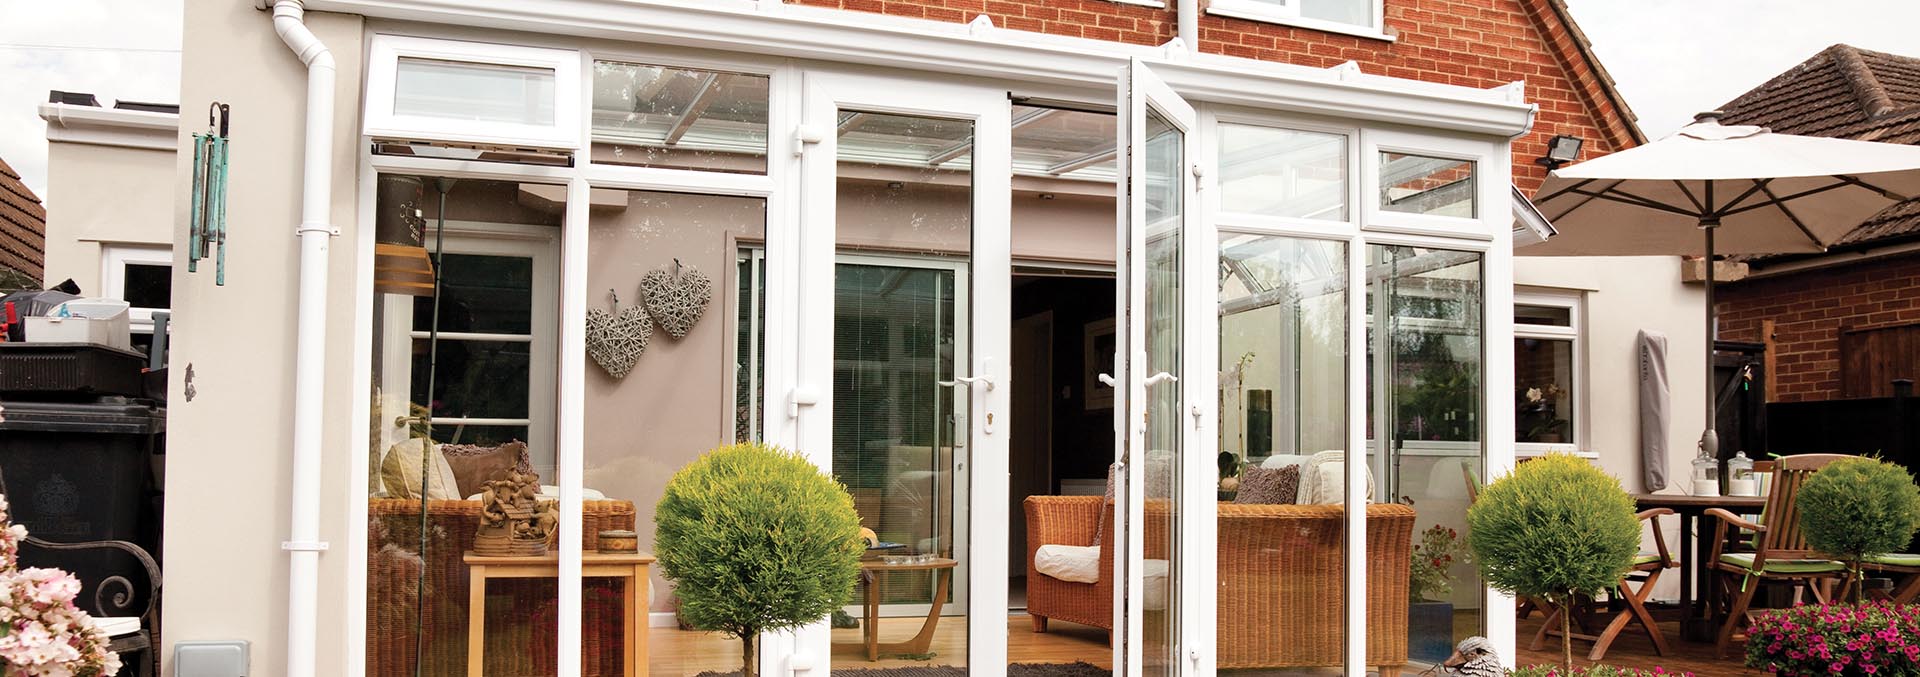 Small lean-to uPVC conservatory